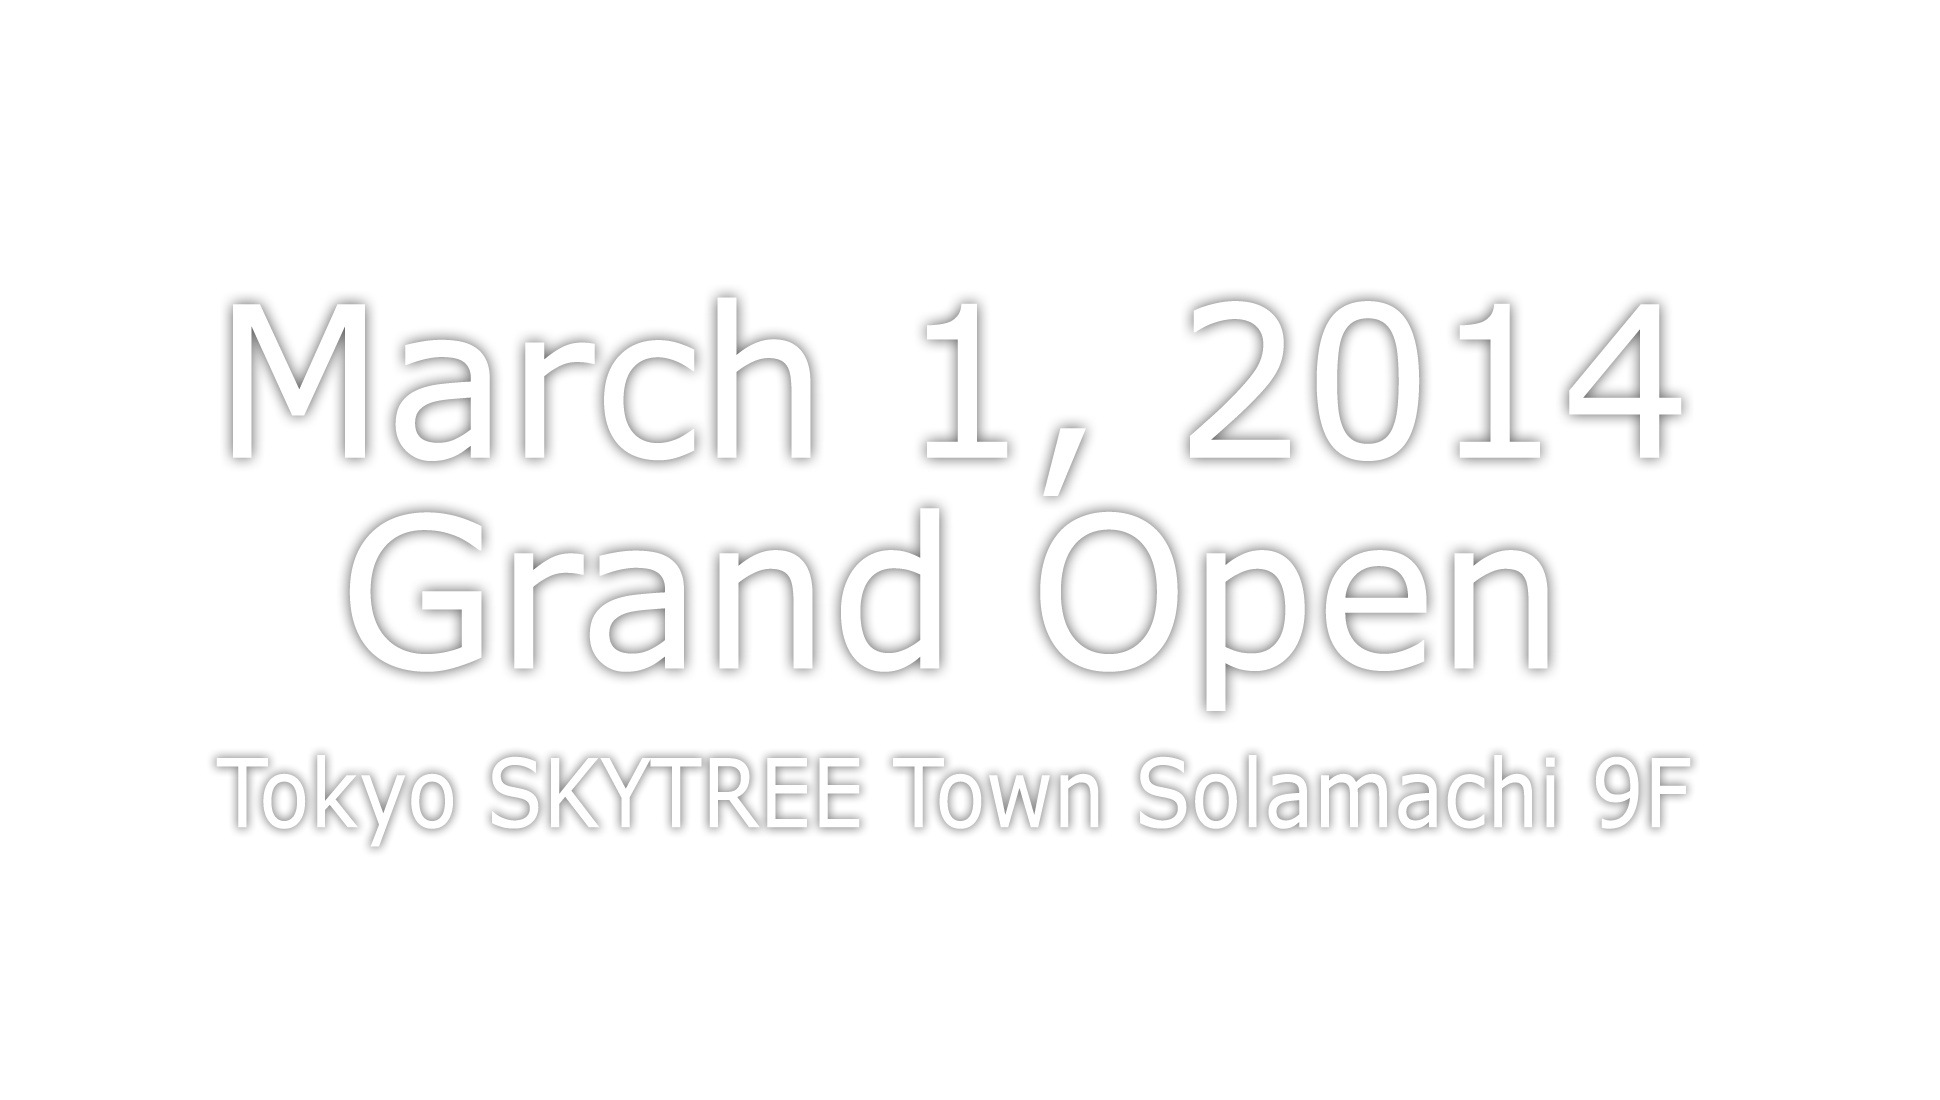 March 1, 2014 Grand Open